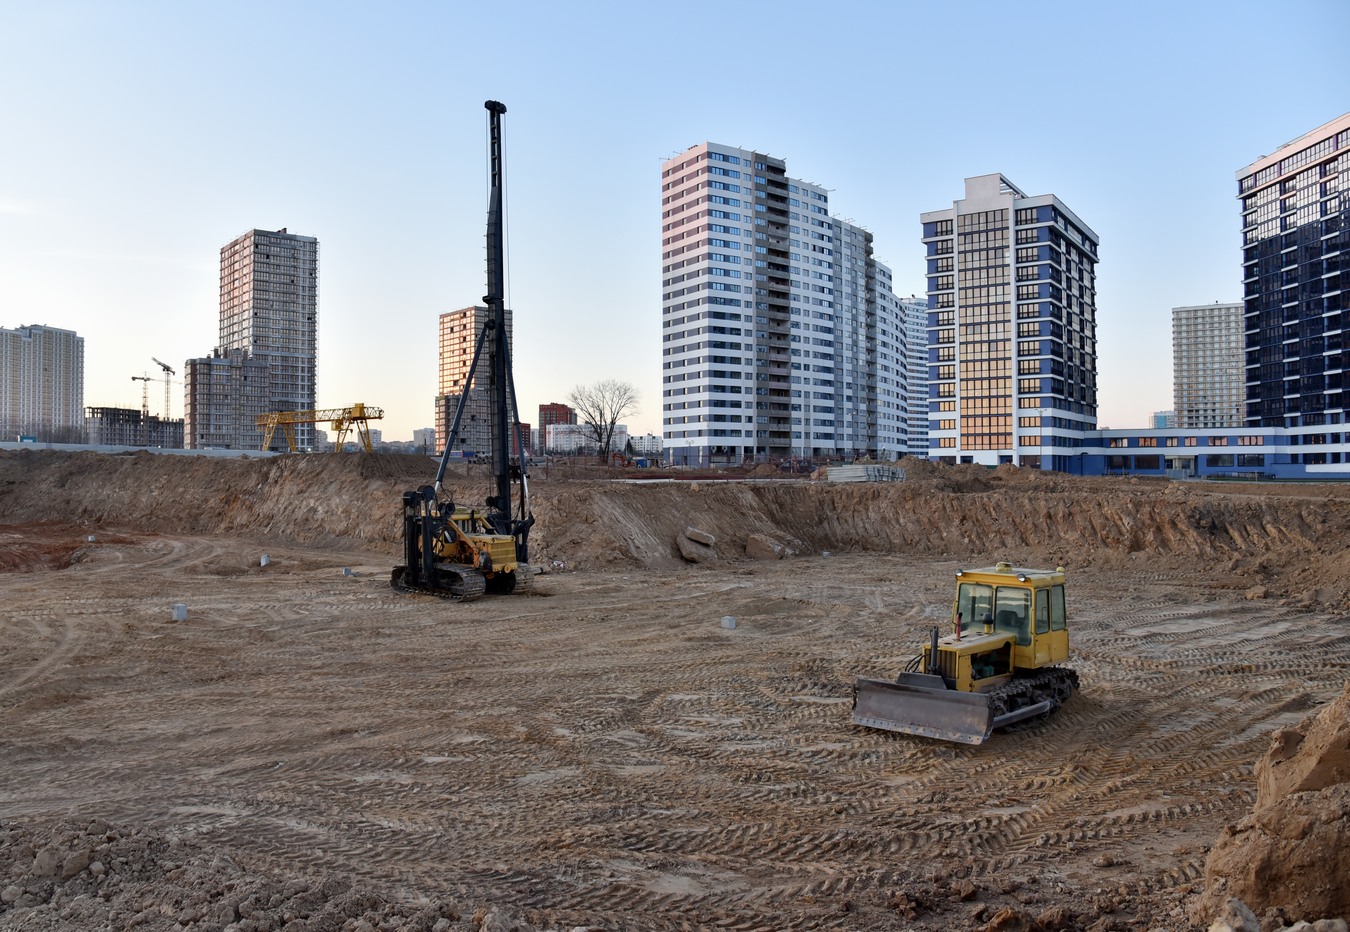 Tracked,Pile-driver,And,Bulldozer,At,Construction,Site,On,Sunset.,Piles